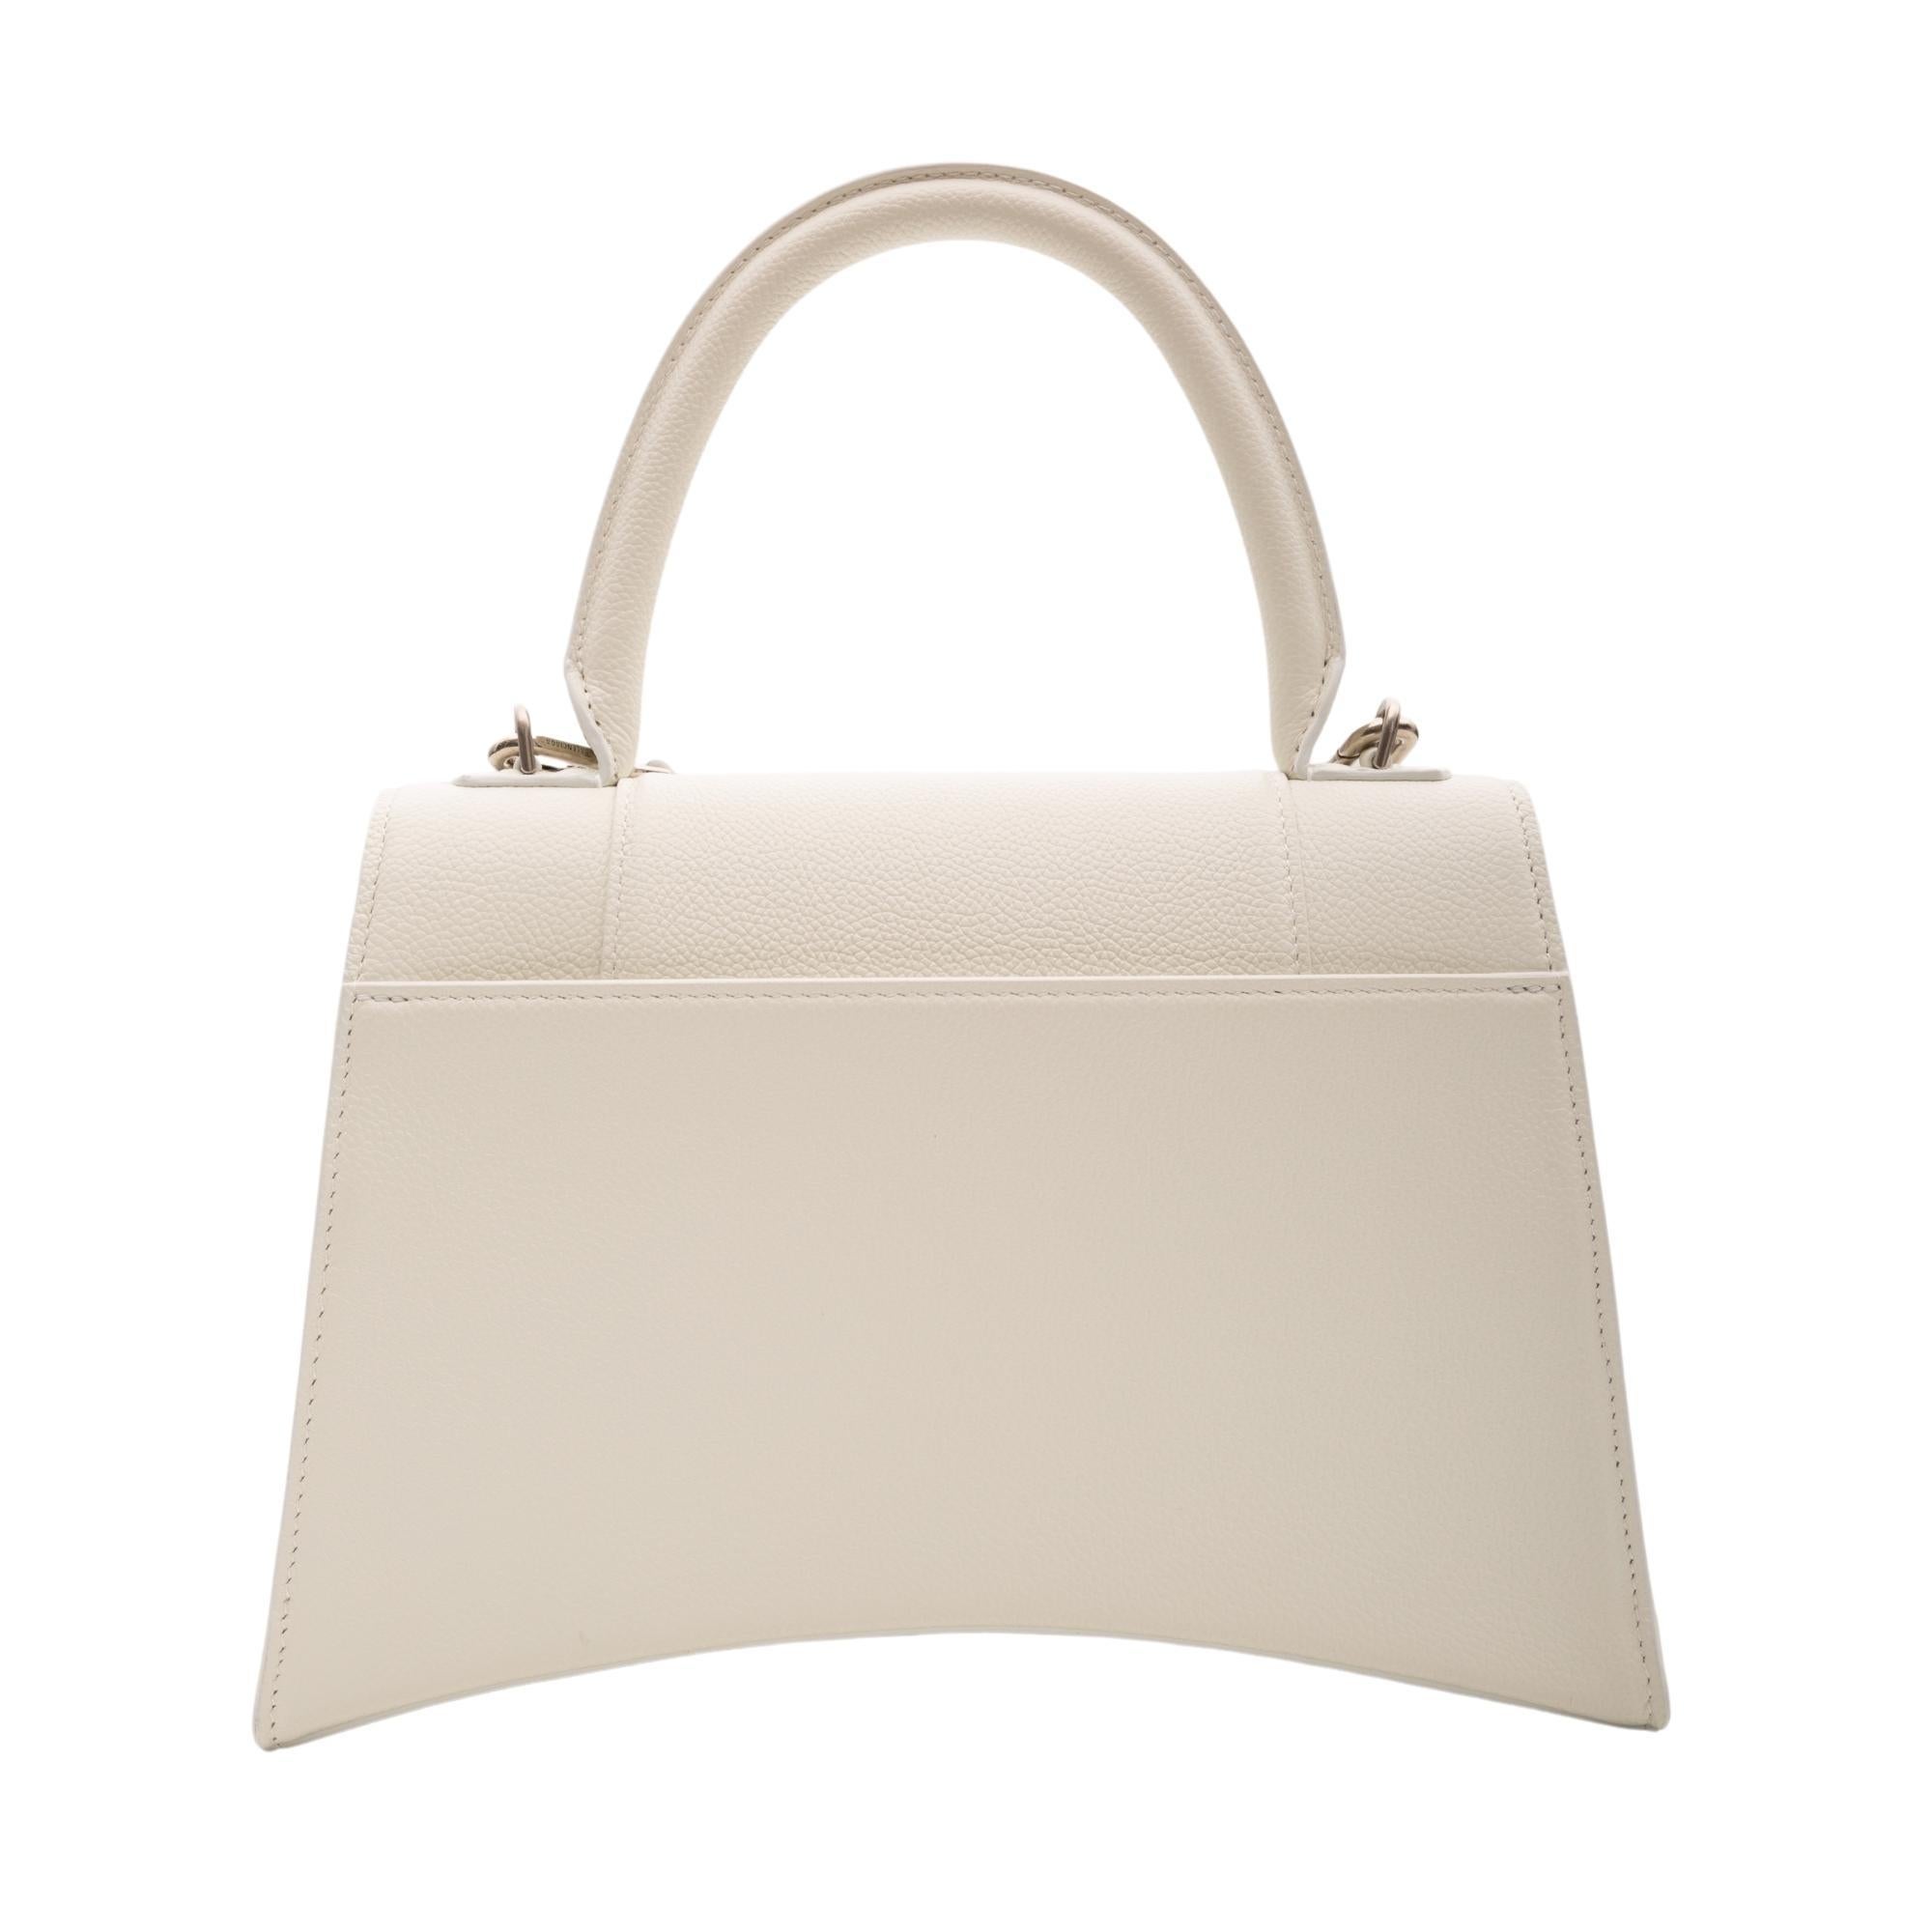 This handbag is made of grained calfskin in white. The bag features a rolled leather top handle, an optional shoulder strap, a signature Balenciaga B charm on front flap, silver hardware, a rear slip pocket and a front flap with snap closure that